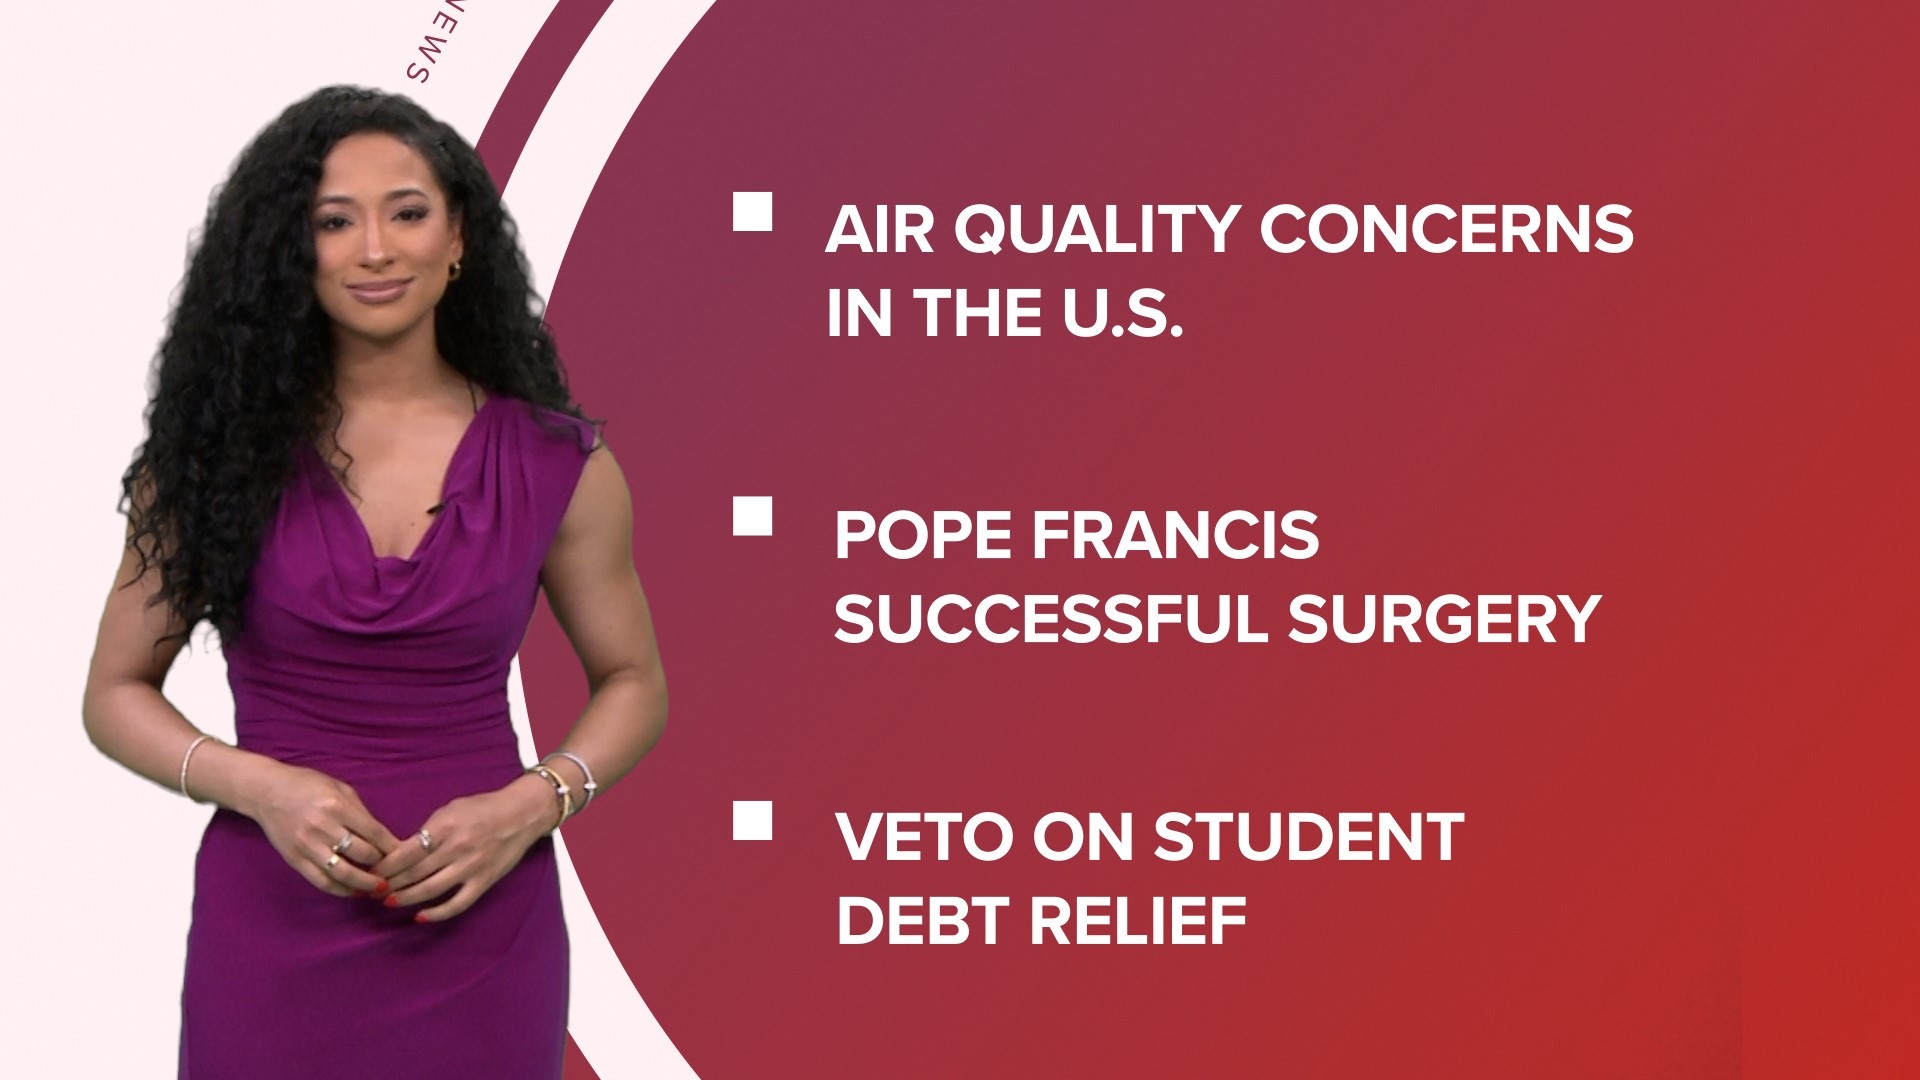 A look at what is happening in the use from dangerous air quality across the U.S. to Biden vetoing student loan relief stop by Congress and Apple IOS 17 updates.